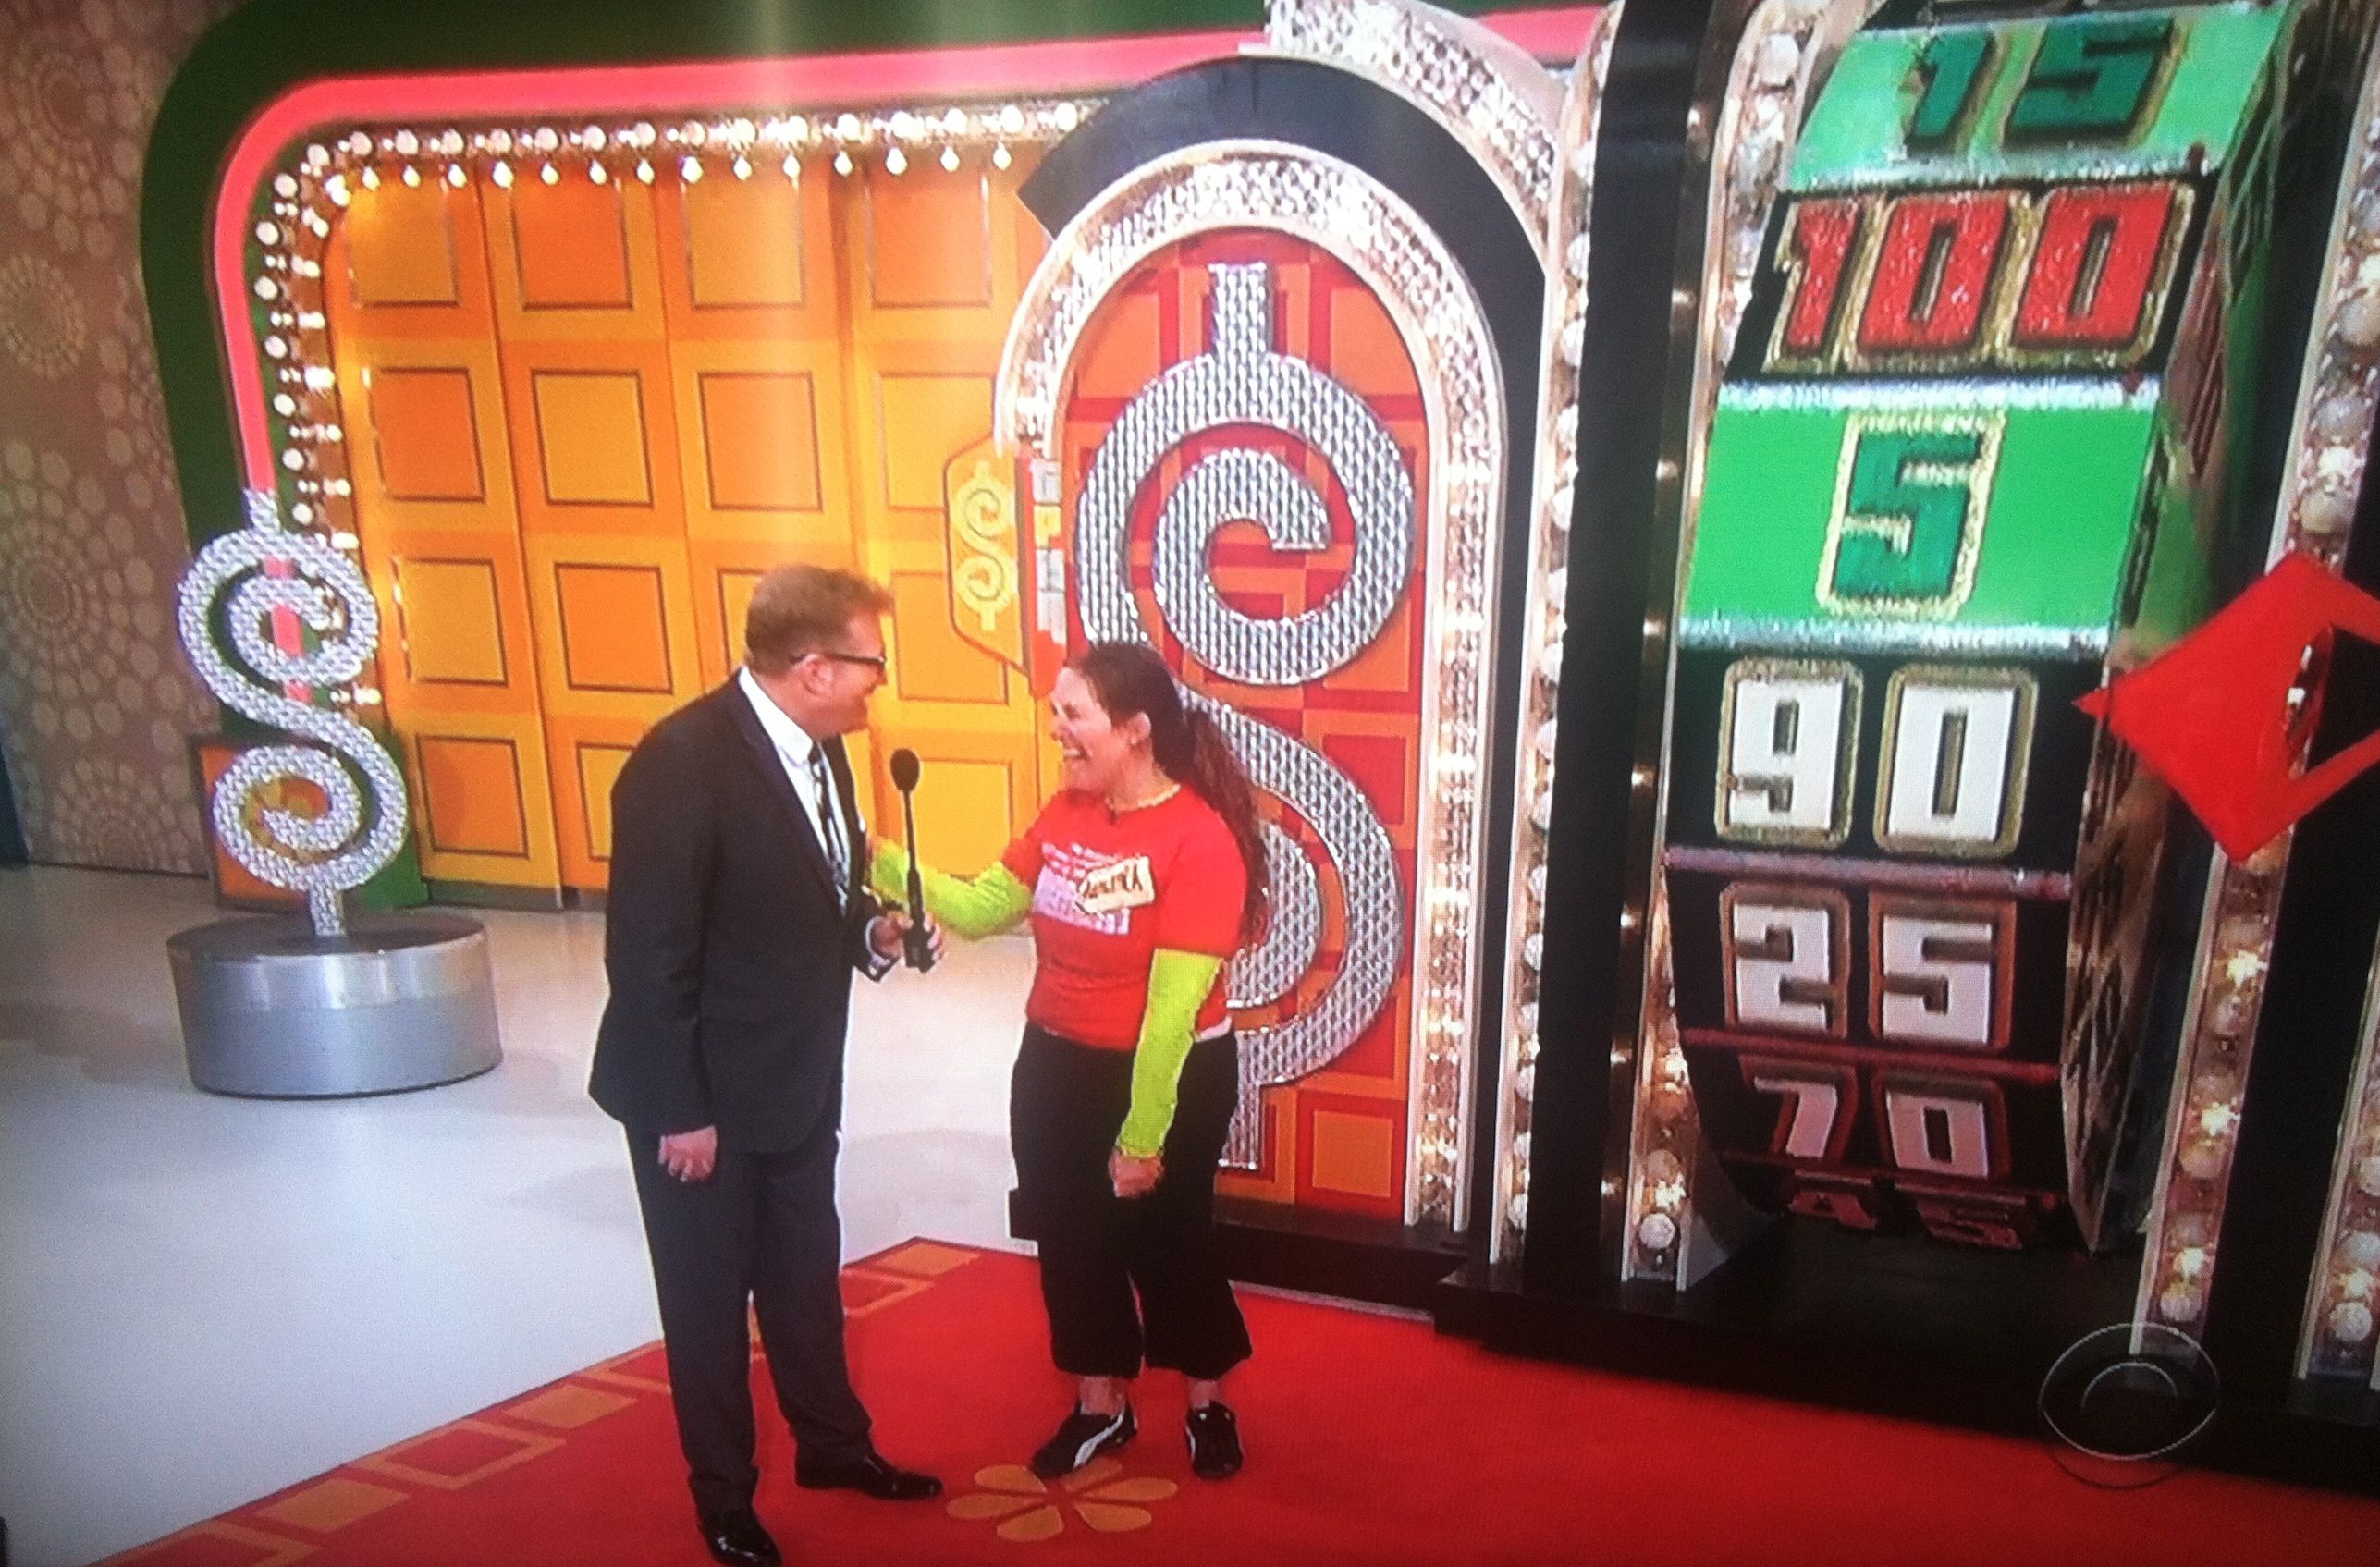 Aurora De Lucia having fun with Drew Carey at The Price is Right wheel